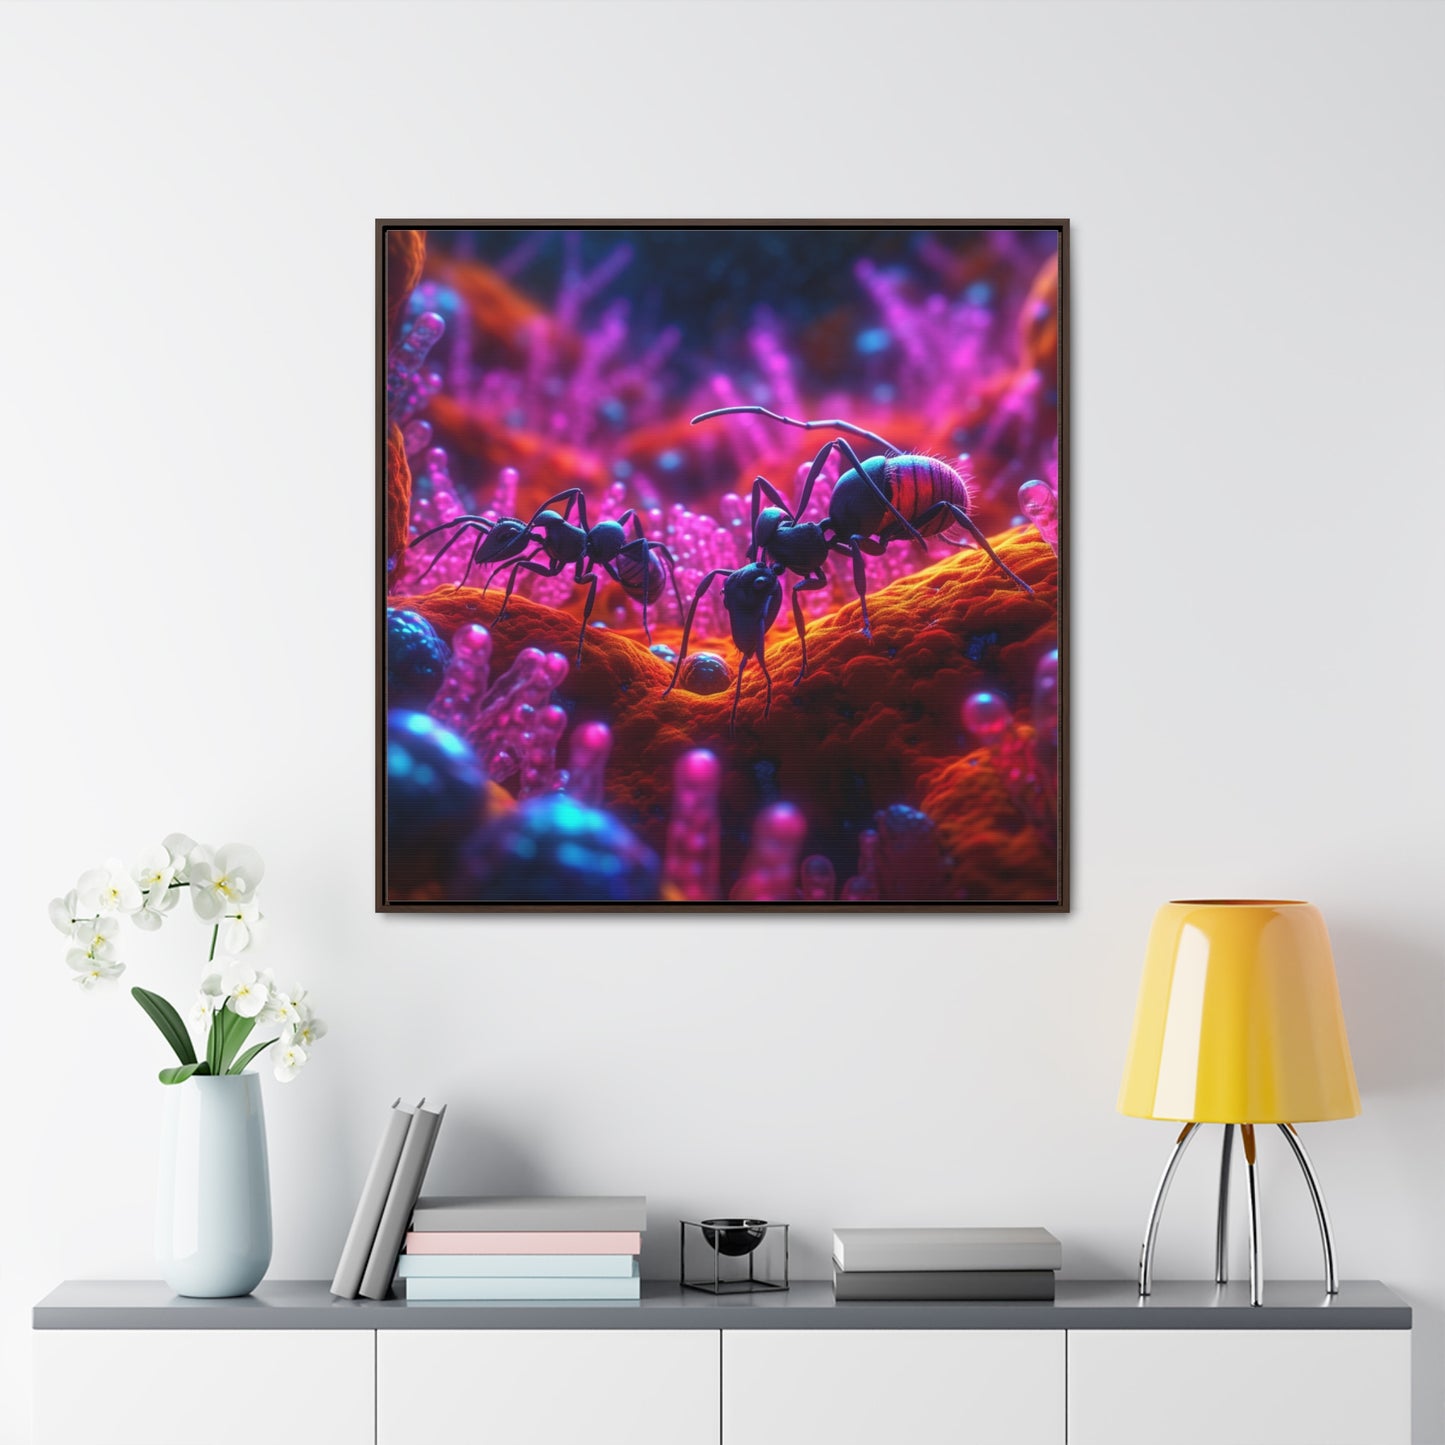 Gallery Canvas Wraps, Square Frame Ants Home 4